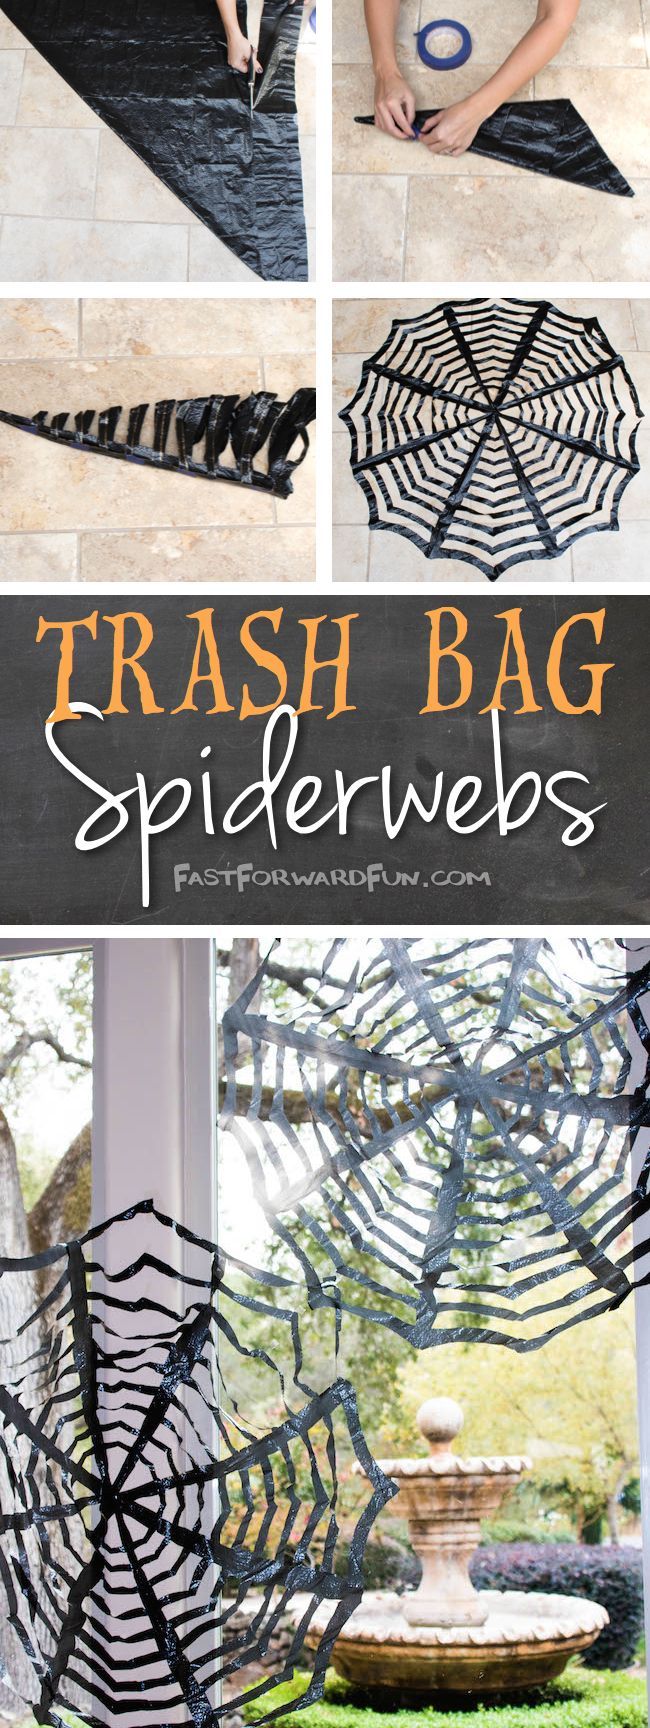 Easy DIY Trashbag Spiderweb Tutorial — Fun video and lots of step-by-step photos! Perfect for Hallowe